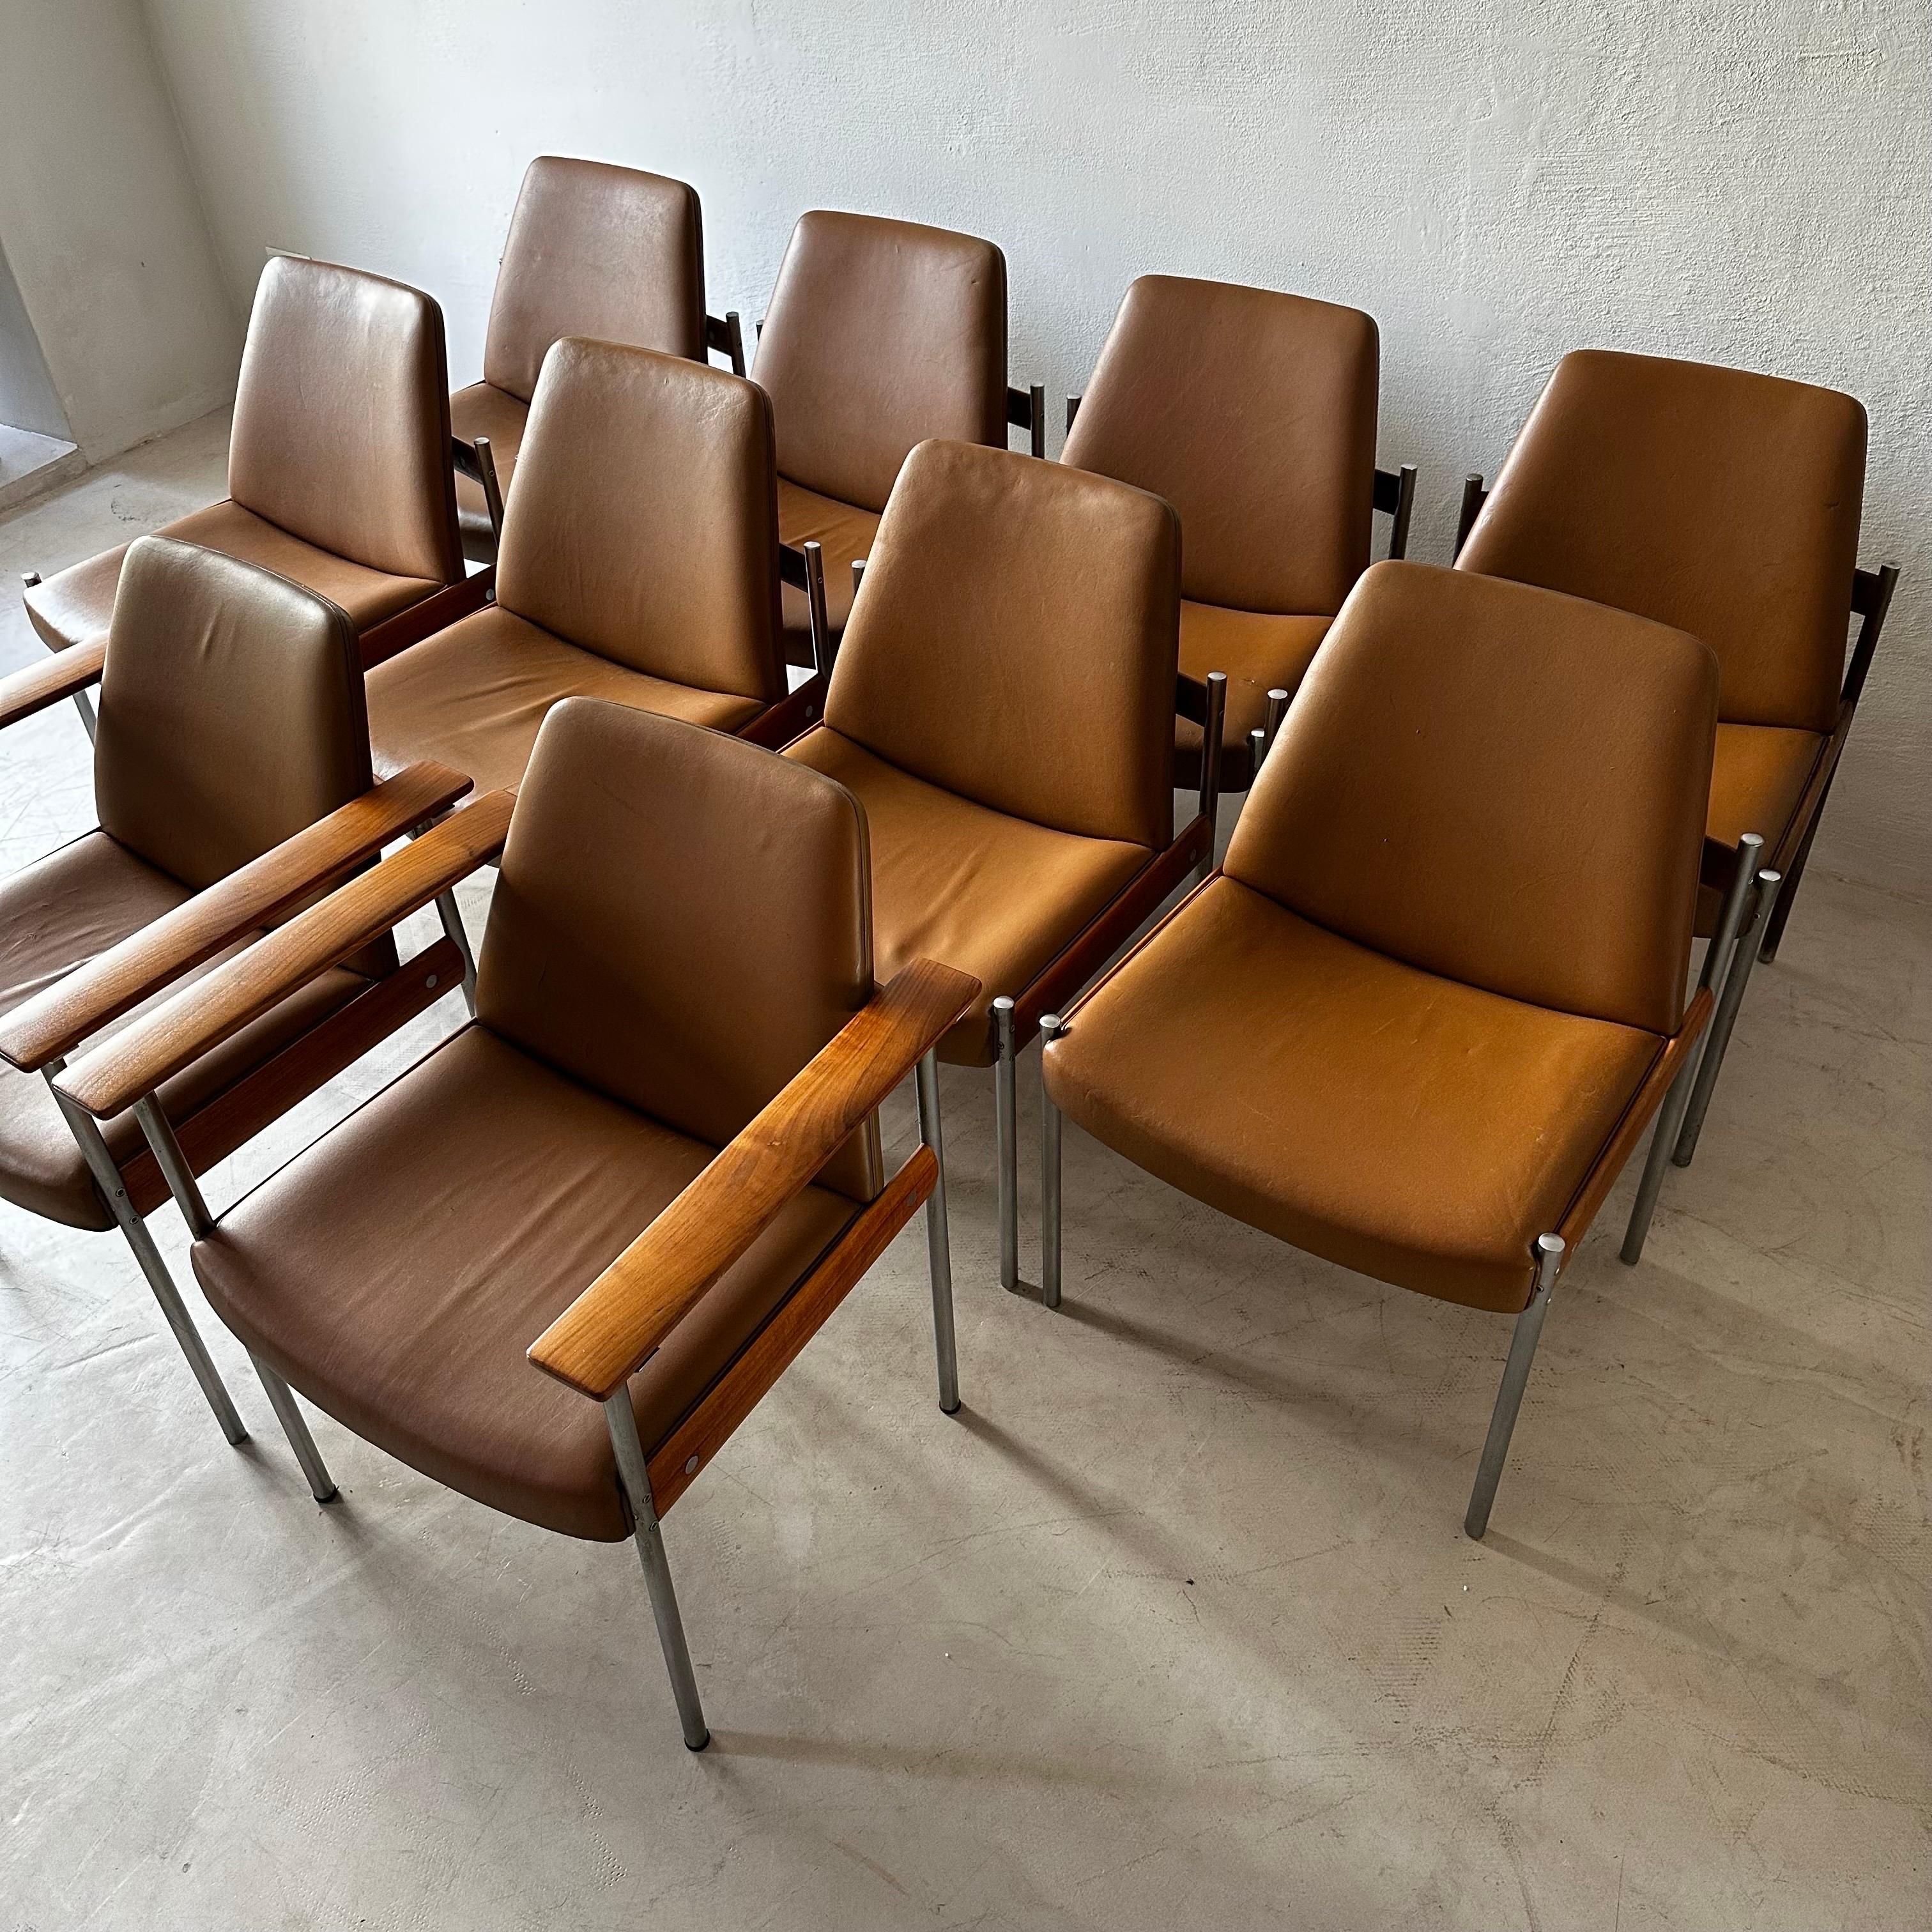 Sven Ivar Dysthe Large Set of 10 Chairs in Cognac Leather and Walnut In Good Condition For Sale In Vienna, AT